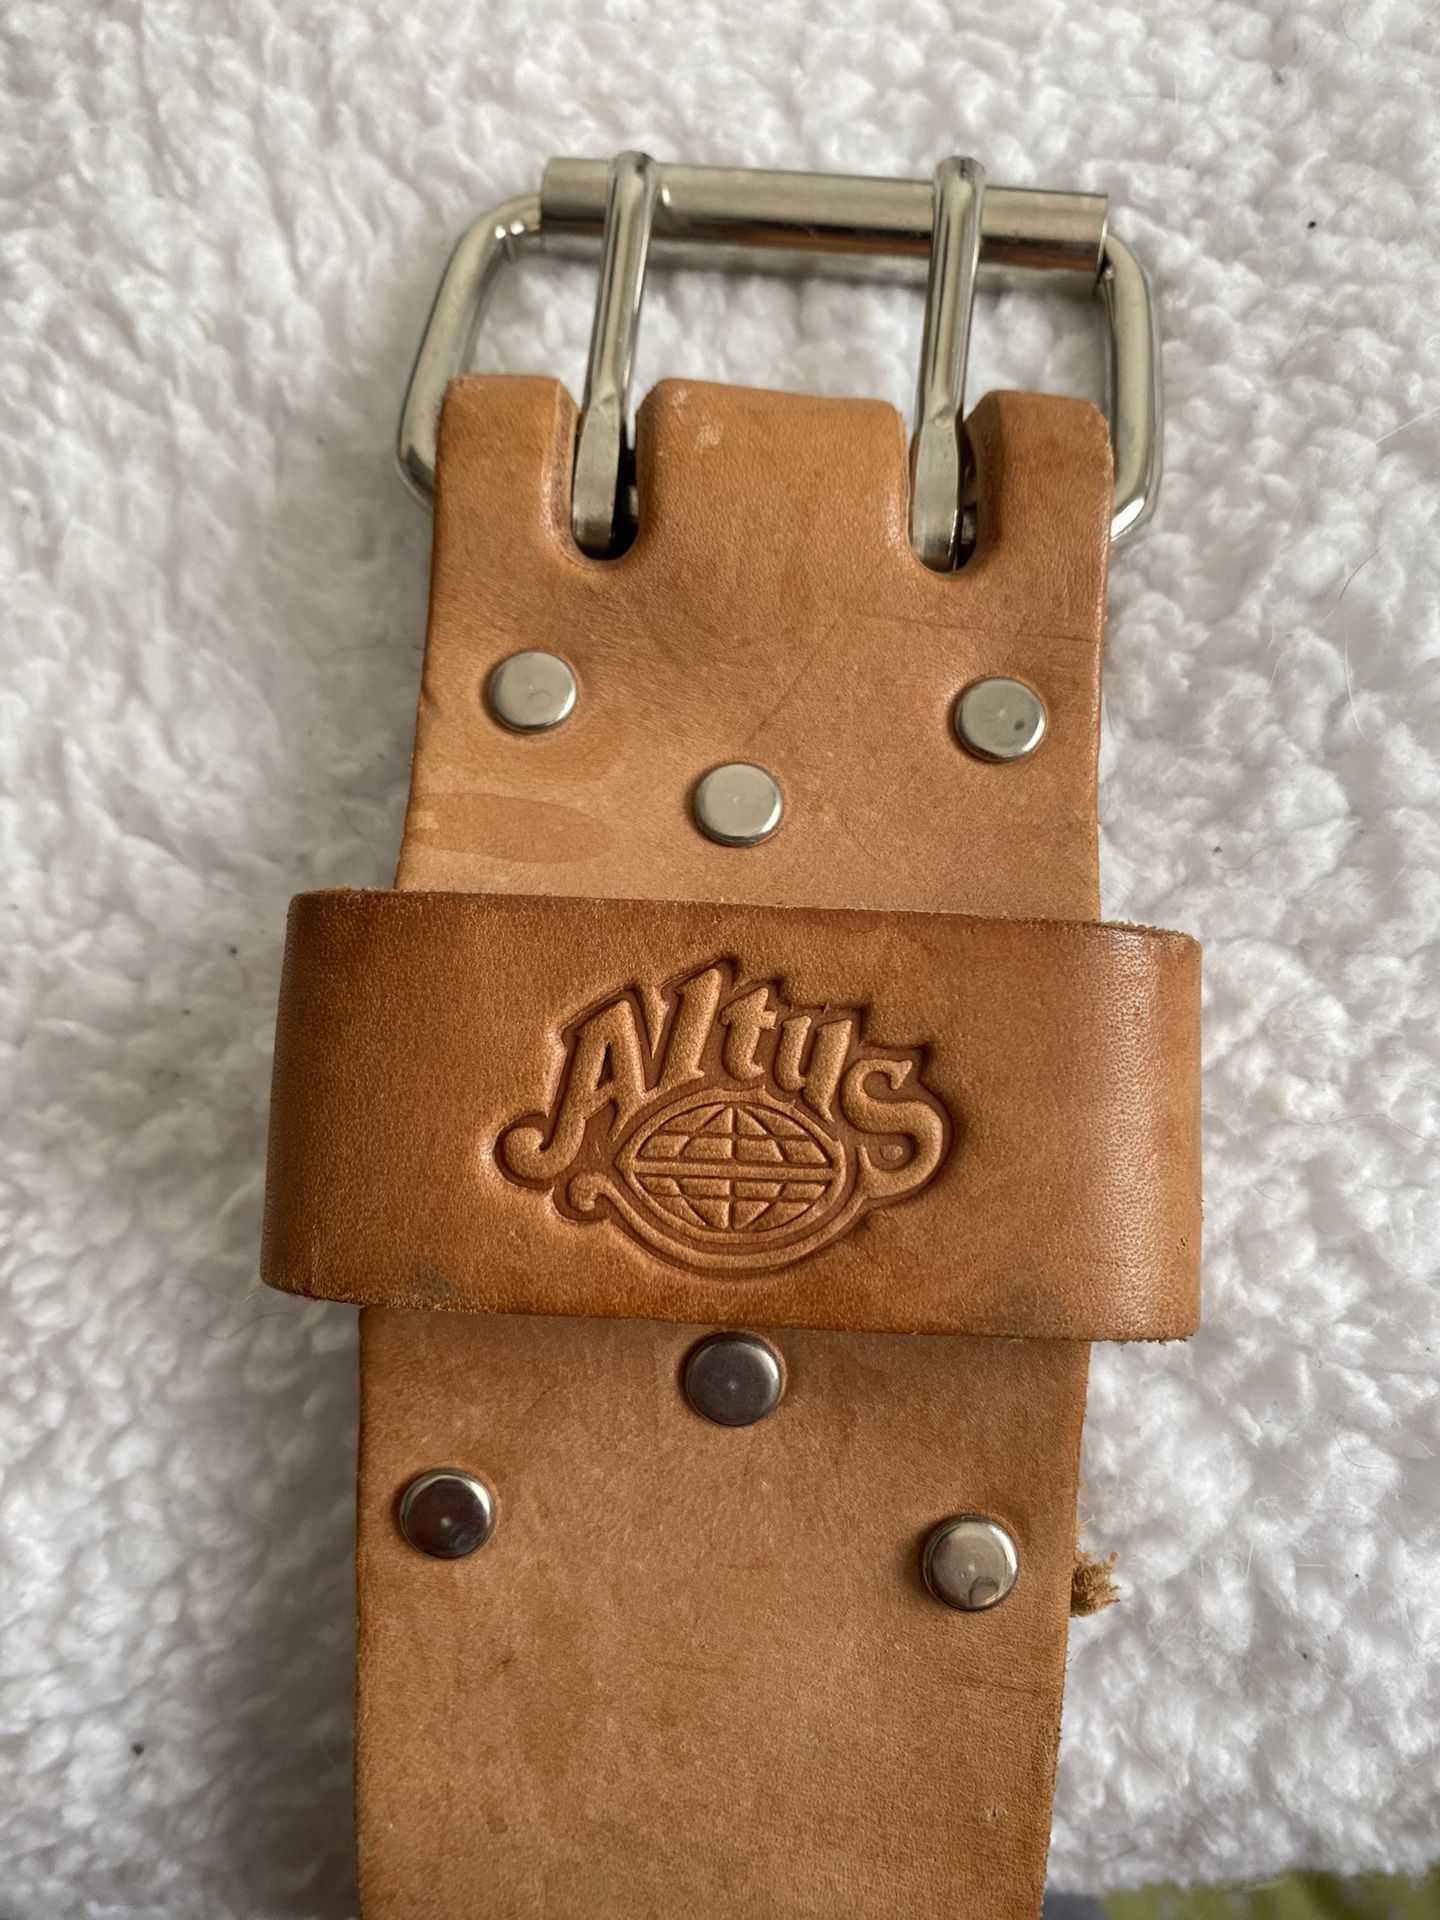 ALTUS Vintage Leather 2 Prong Weightlifting Belt Small 24-28